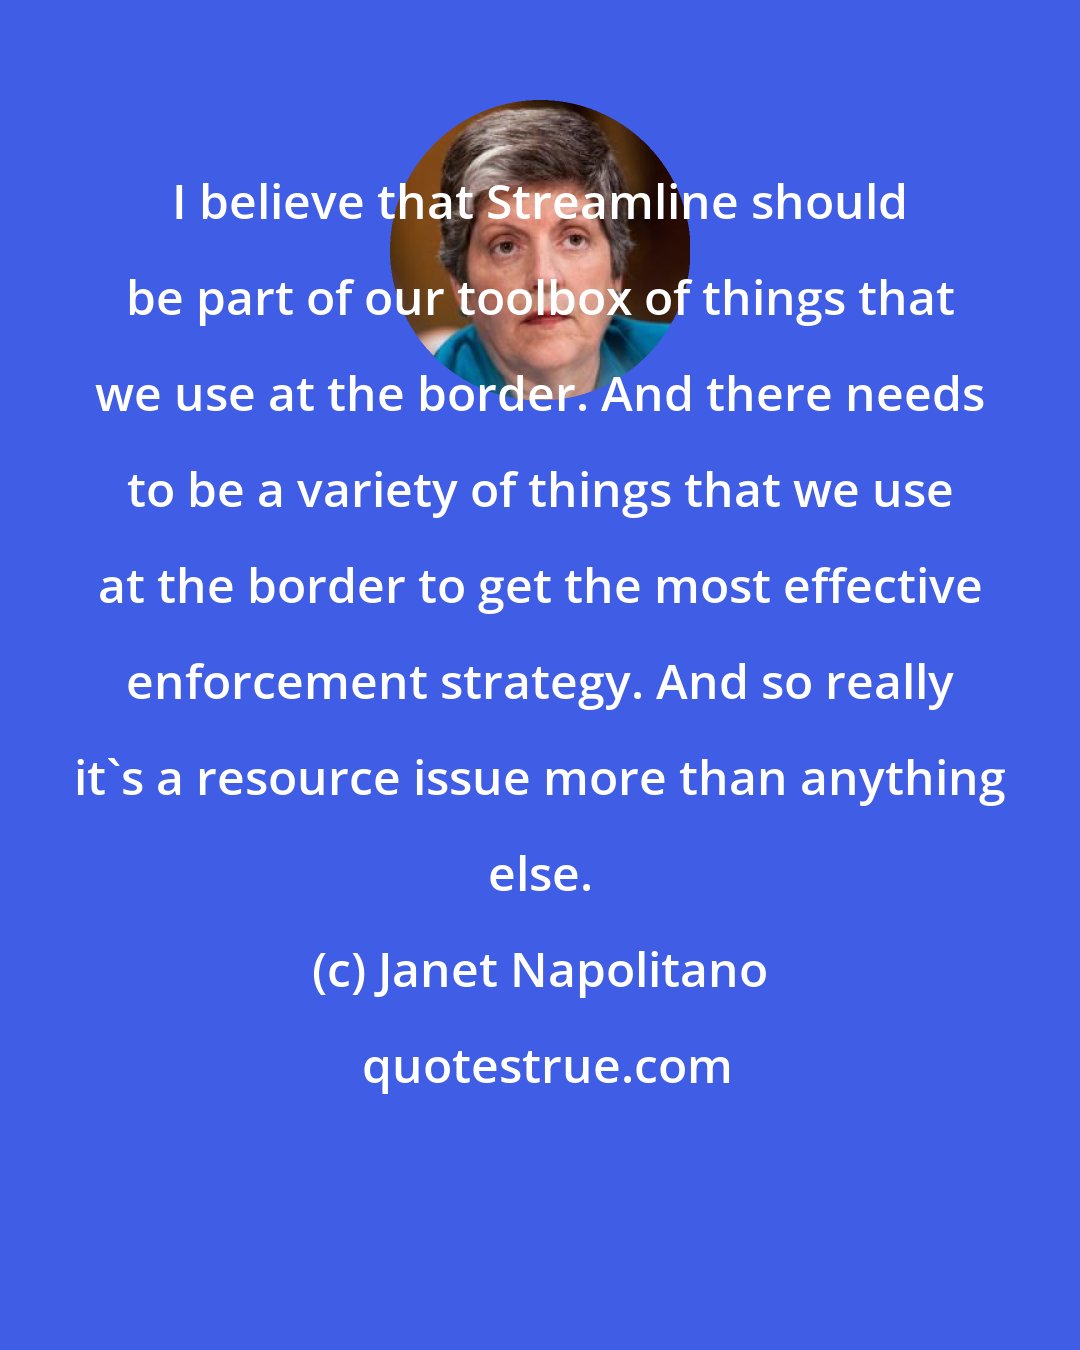 Janet Napolitano: I believe that Streamline should be part of our toolbox of things that we use at the border. And there needs to be a variety of things that we use at the border to get the most effective enforcement strategy. And so really it's a resource issue more than anything else.